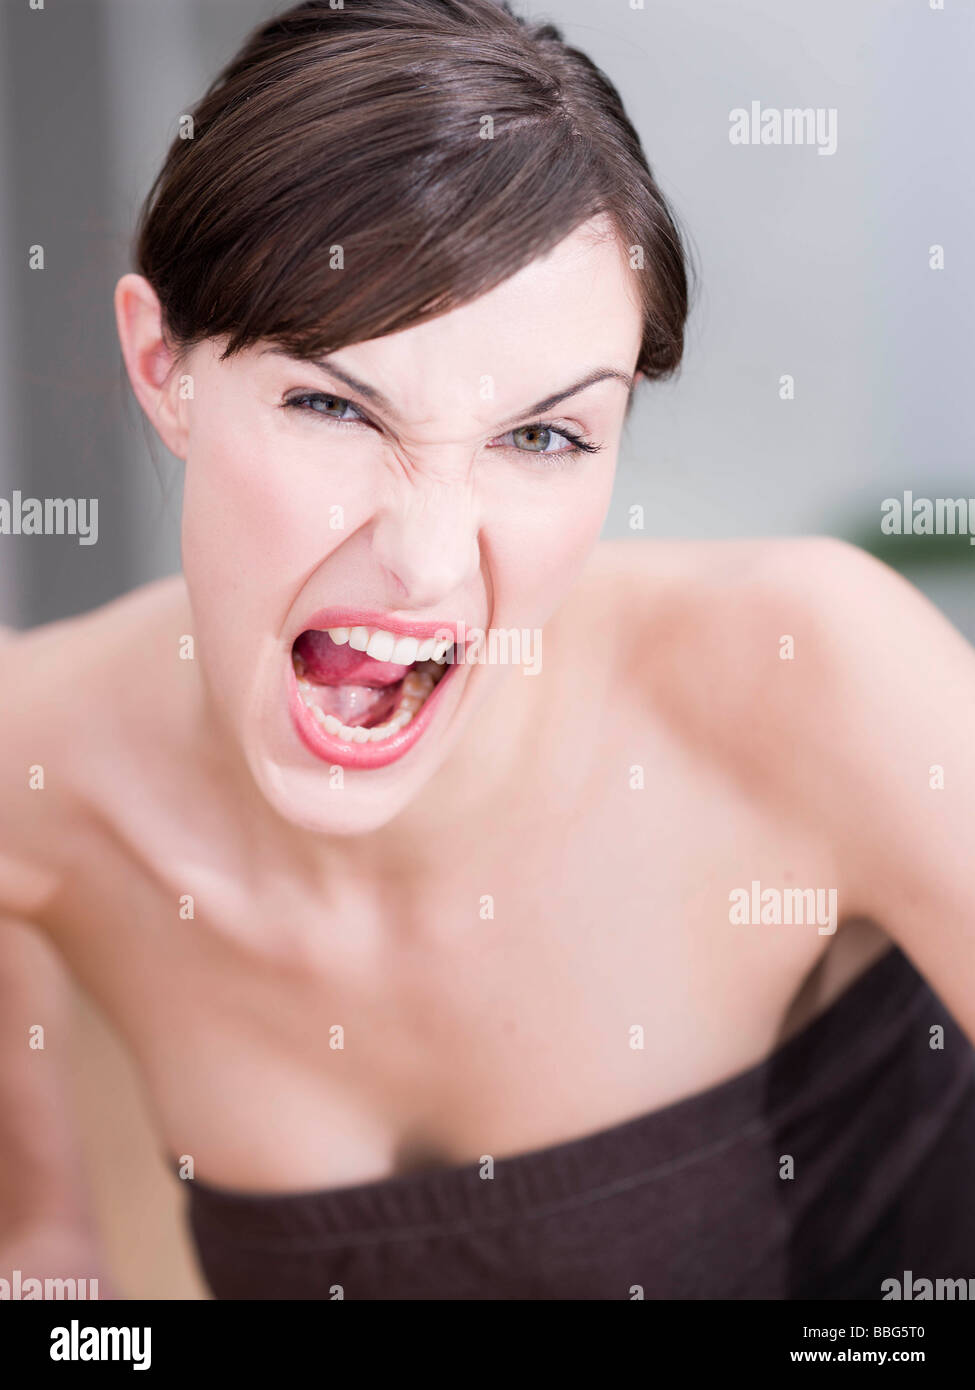 Woman making a face Stock Photo